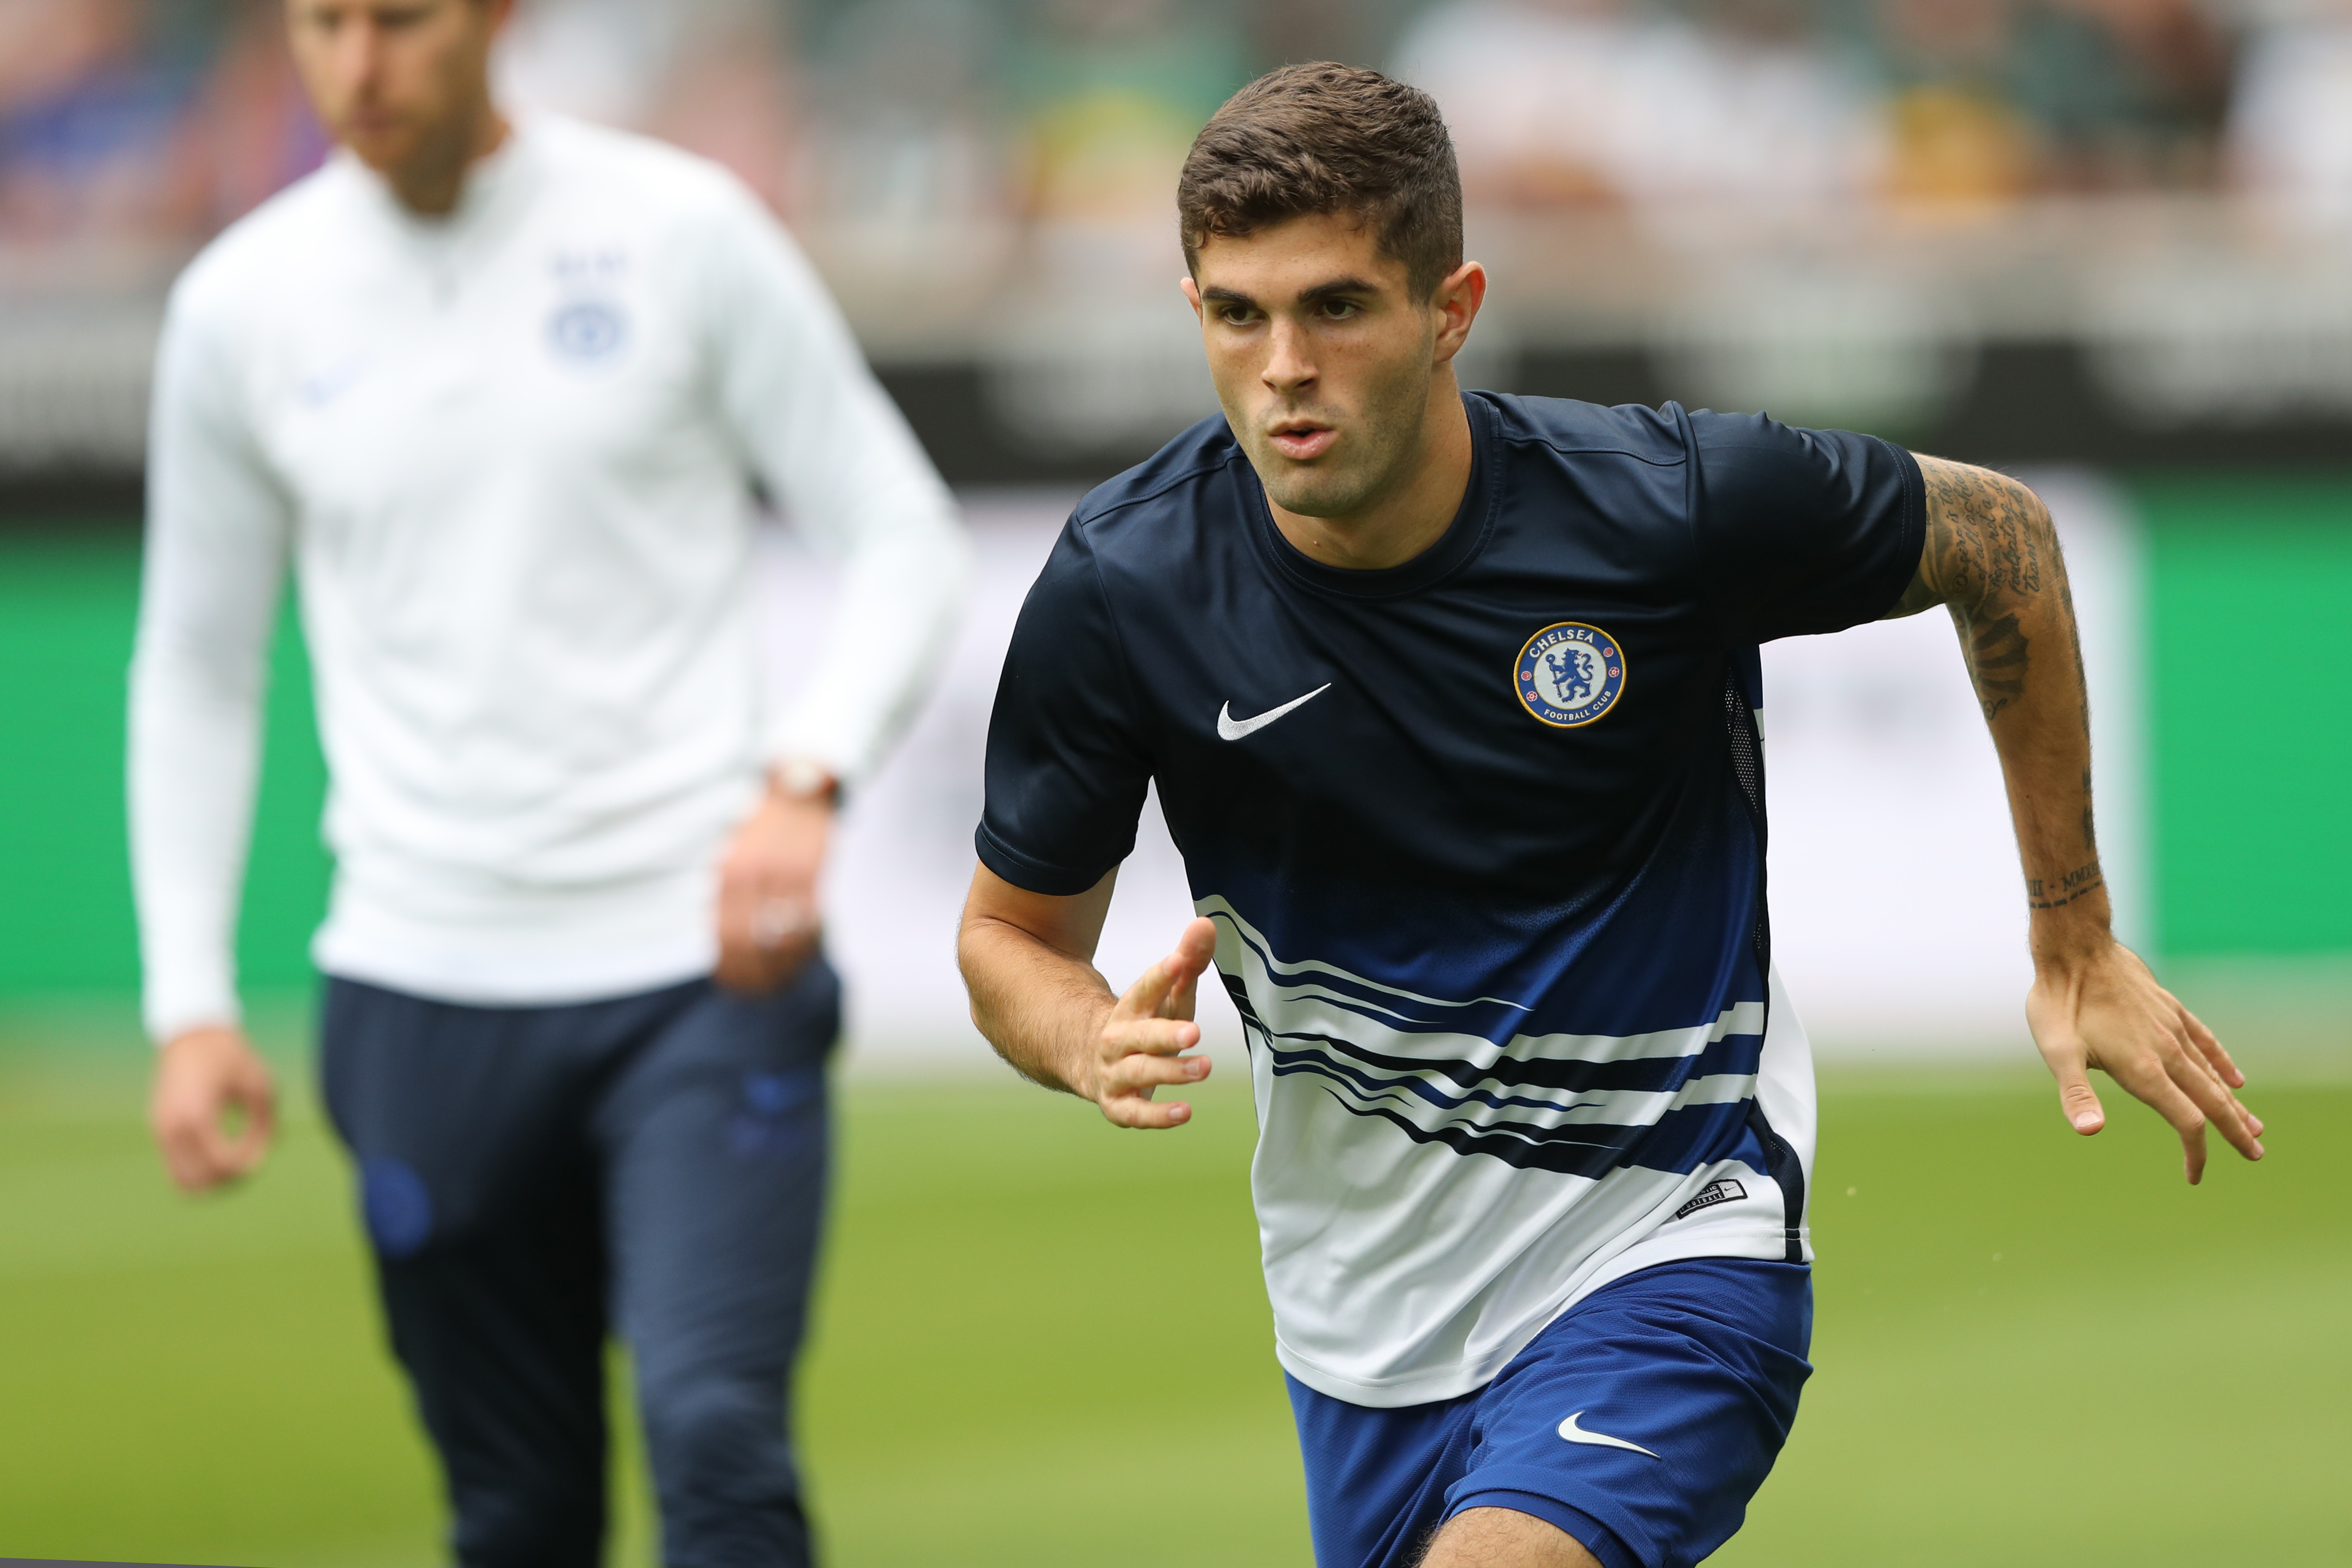 MOENCHENGLADBACH, GERMANY - AUGUST 03: Christian Pulisic of Chelsea prepares prior to the pre-season friendly match between Borussia Moenchengladbach and FC Chelsea at Borussia-Park on August 03, 2019 in Moenchengladbach, Germany. The match between Moenchengladbach and Chelsea ended 2-2.  (Photo by Christof Koepsel/Bongarts/Getty Images)